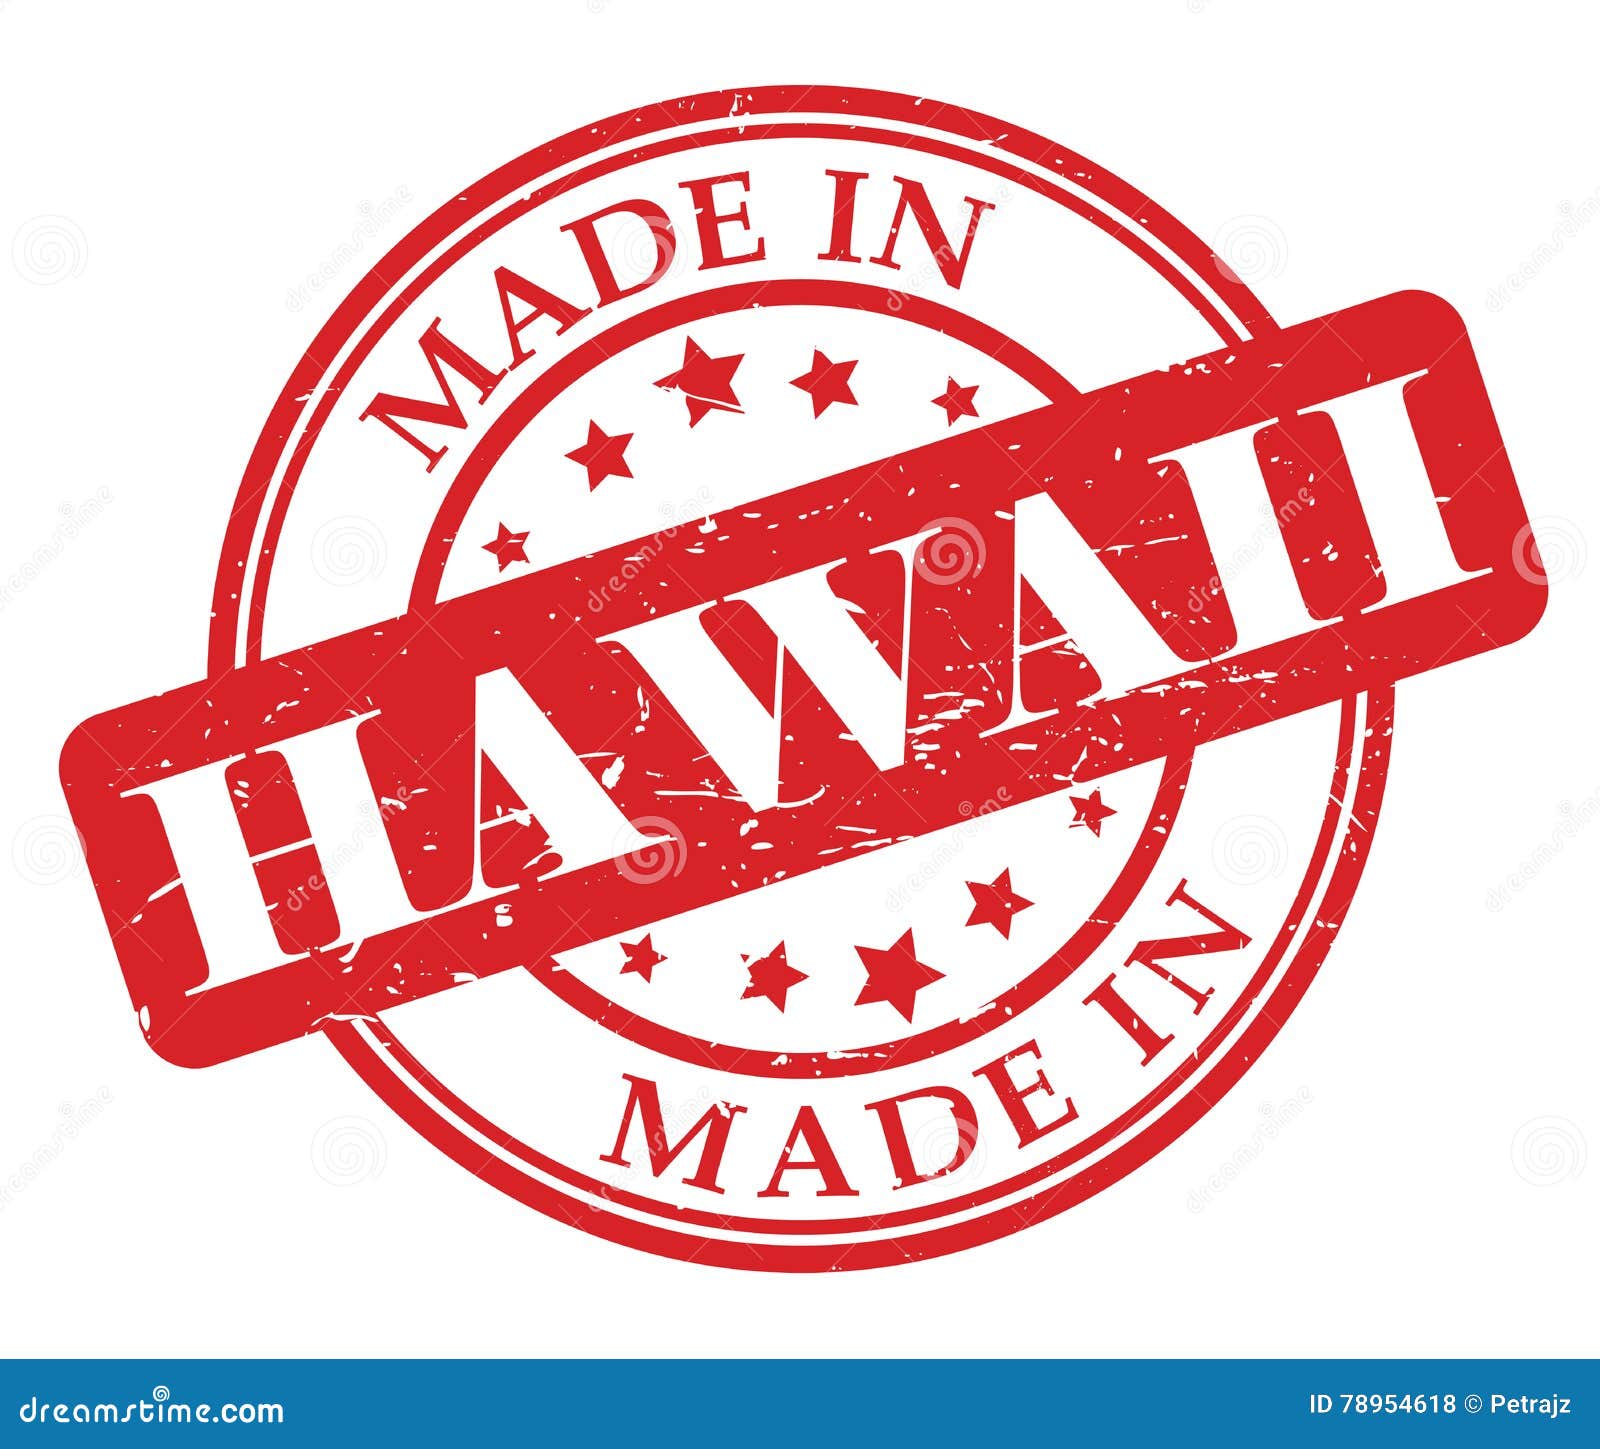 made in hawaii stamp